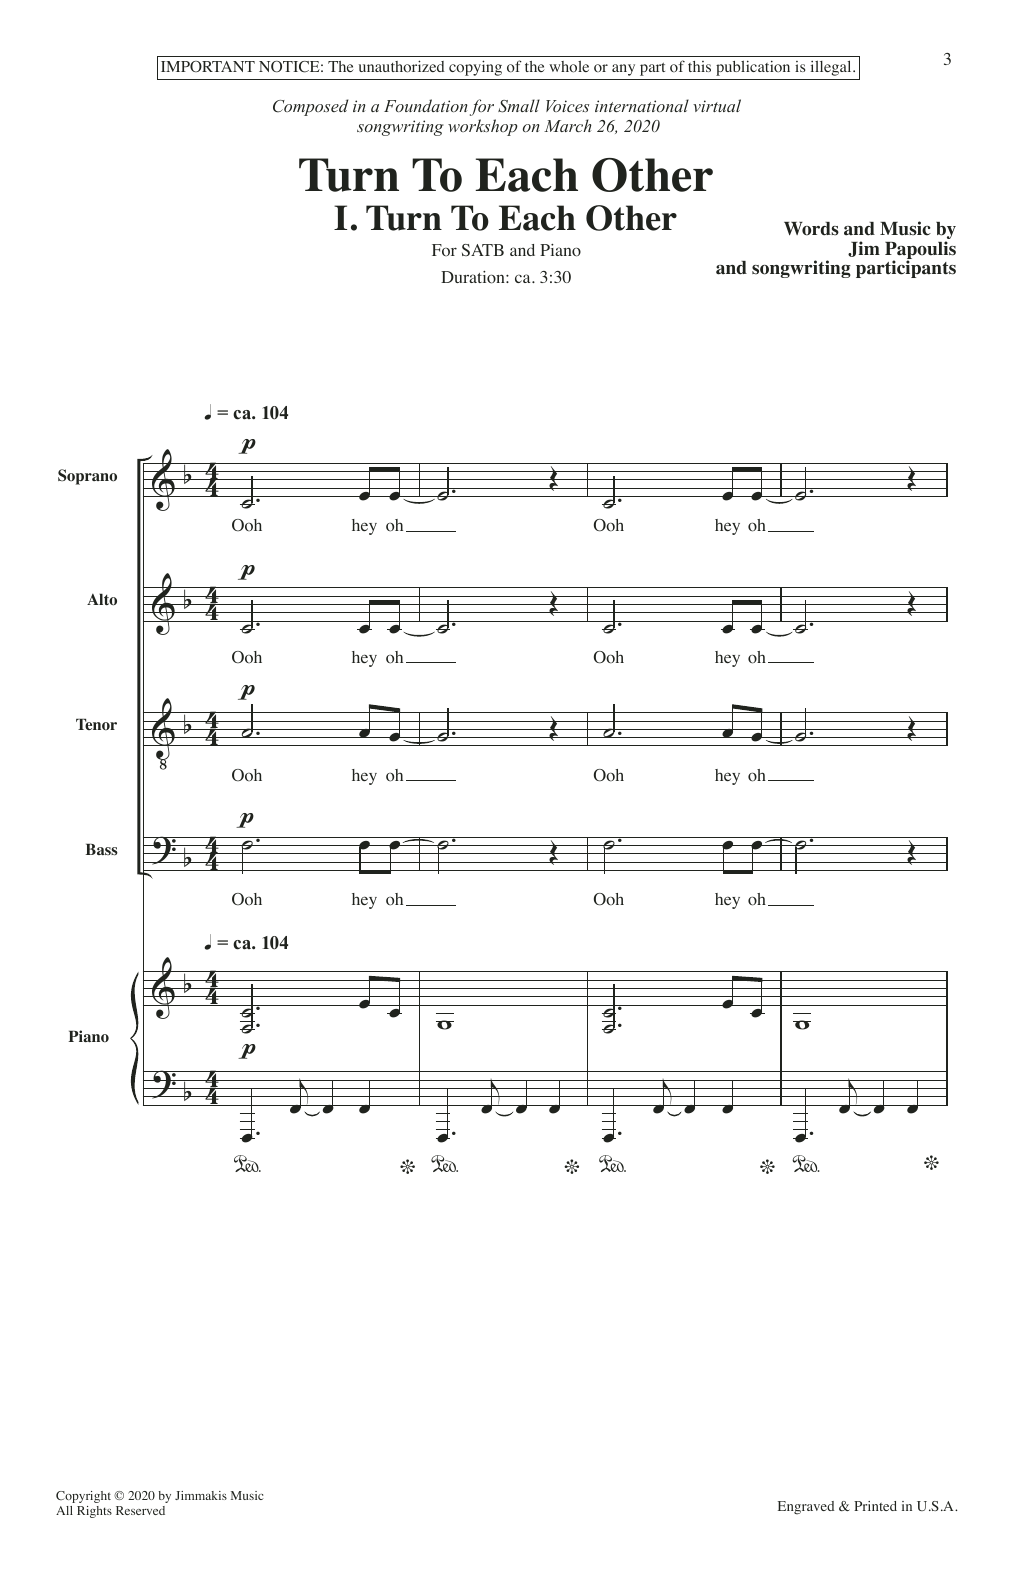 Download Jim Papoulis Turn To Each Other (Collection) Sheet Music